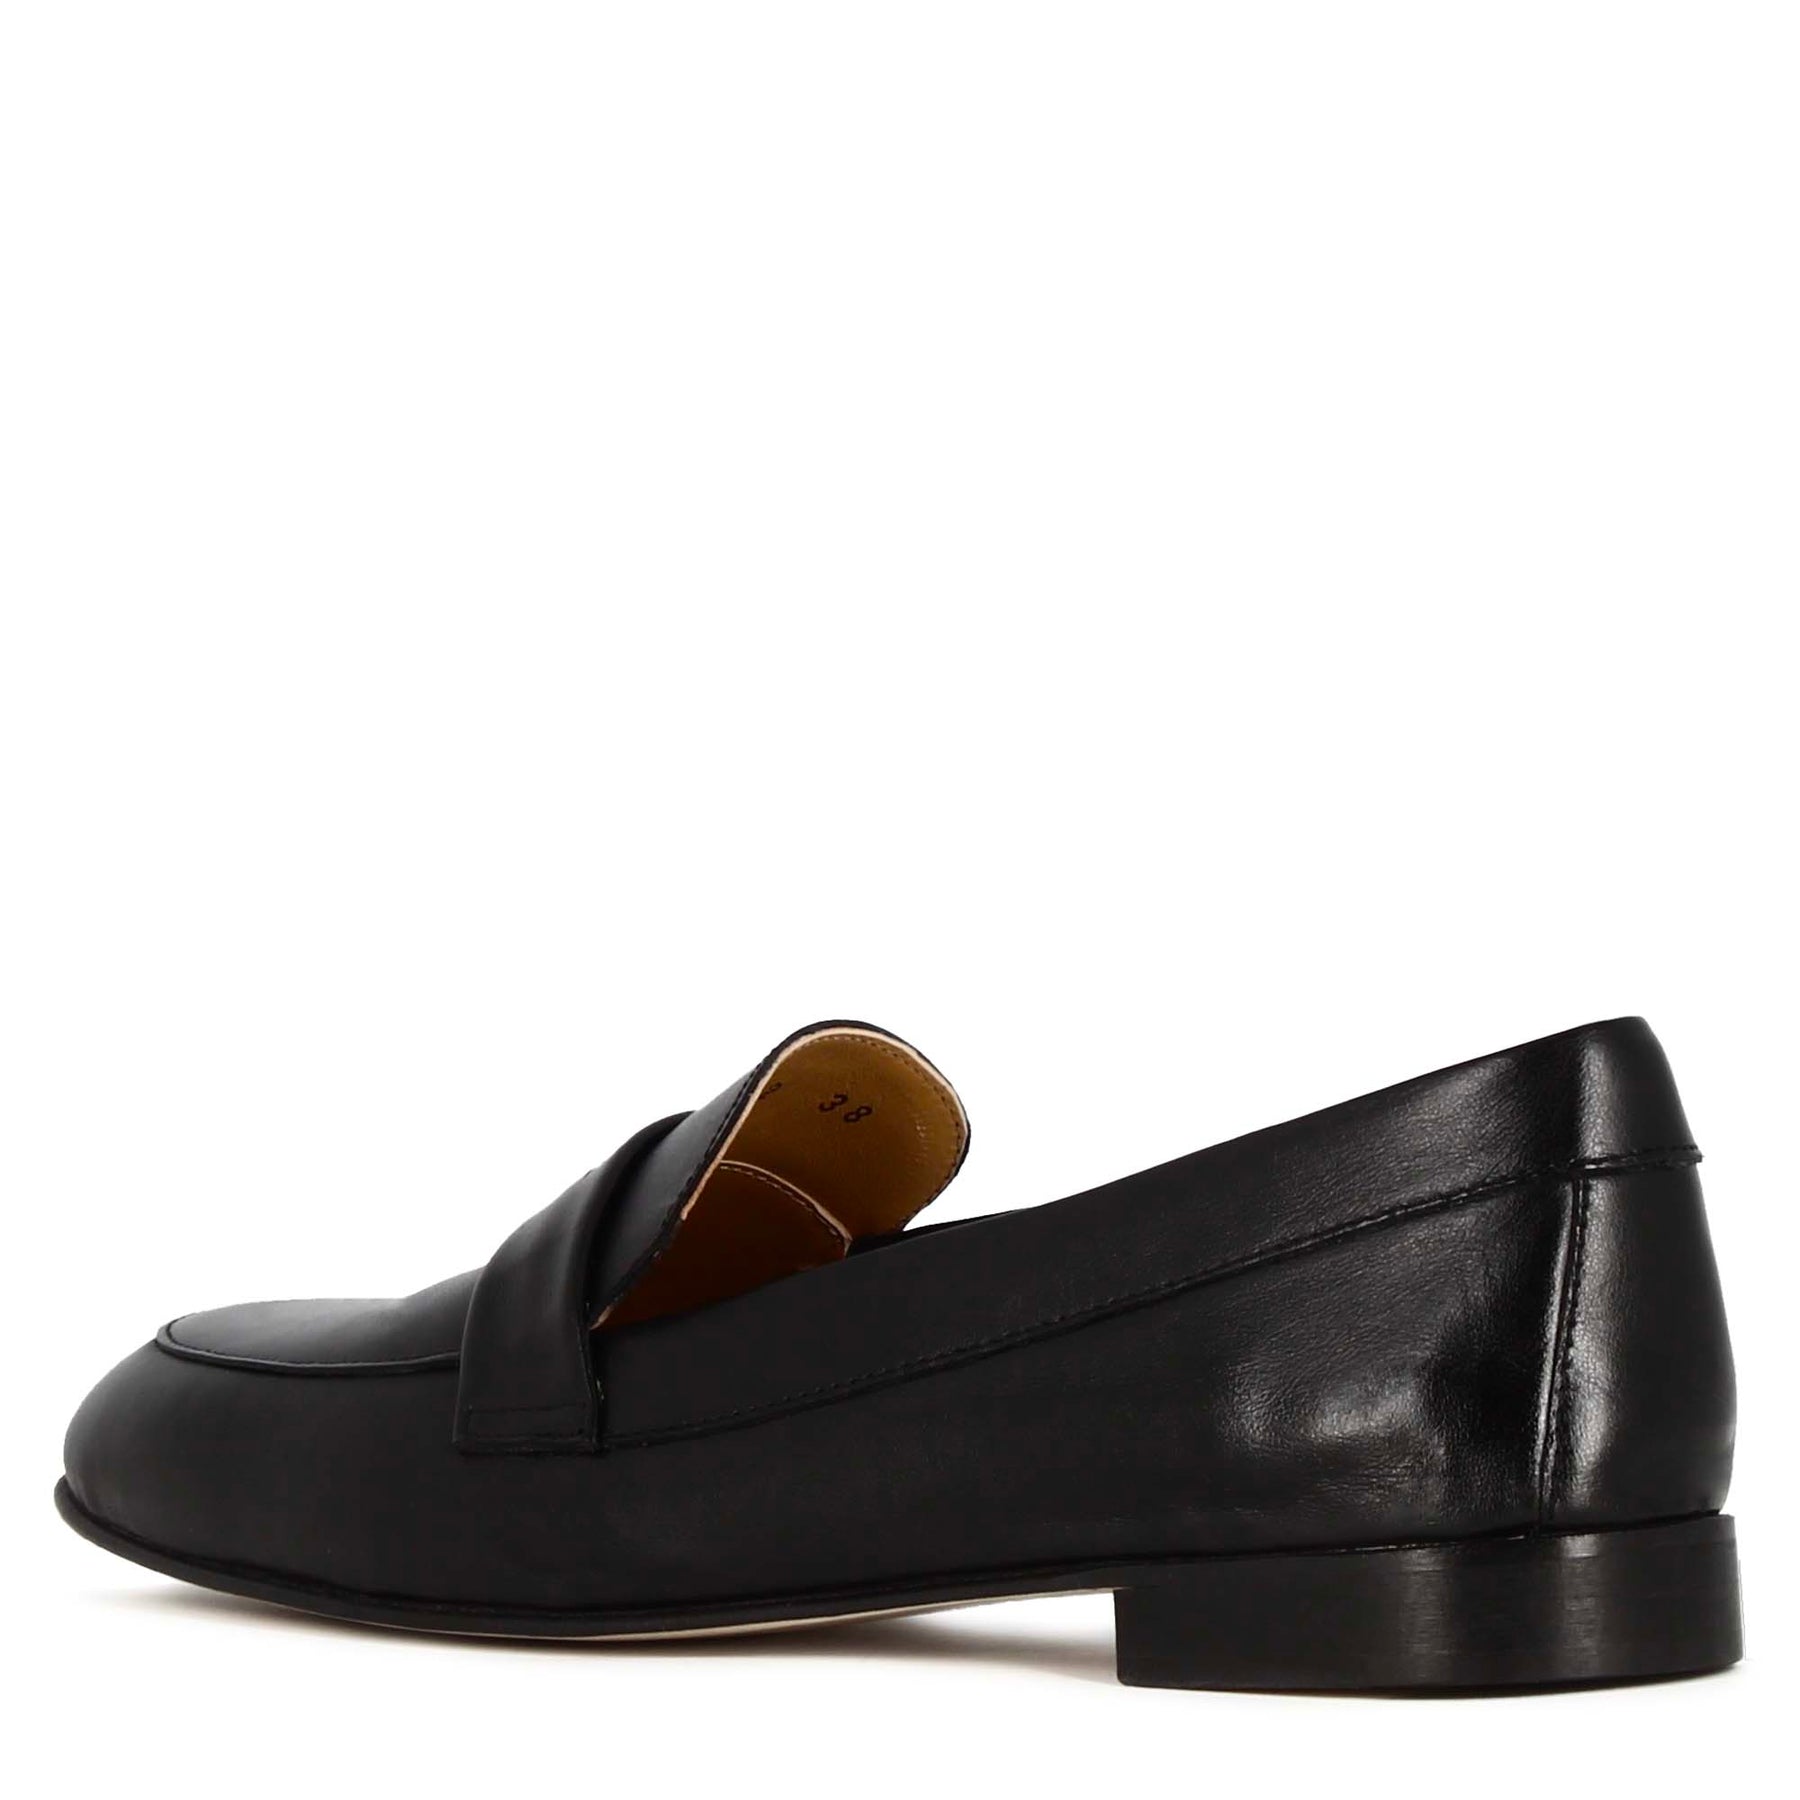 Classic handmade black leather women's moccasin